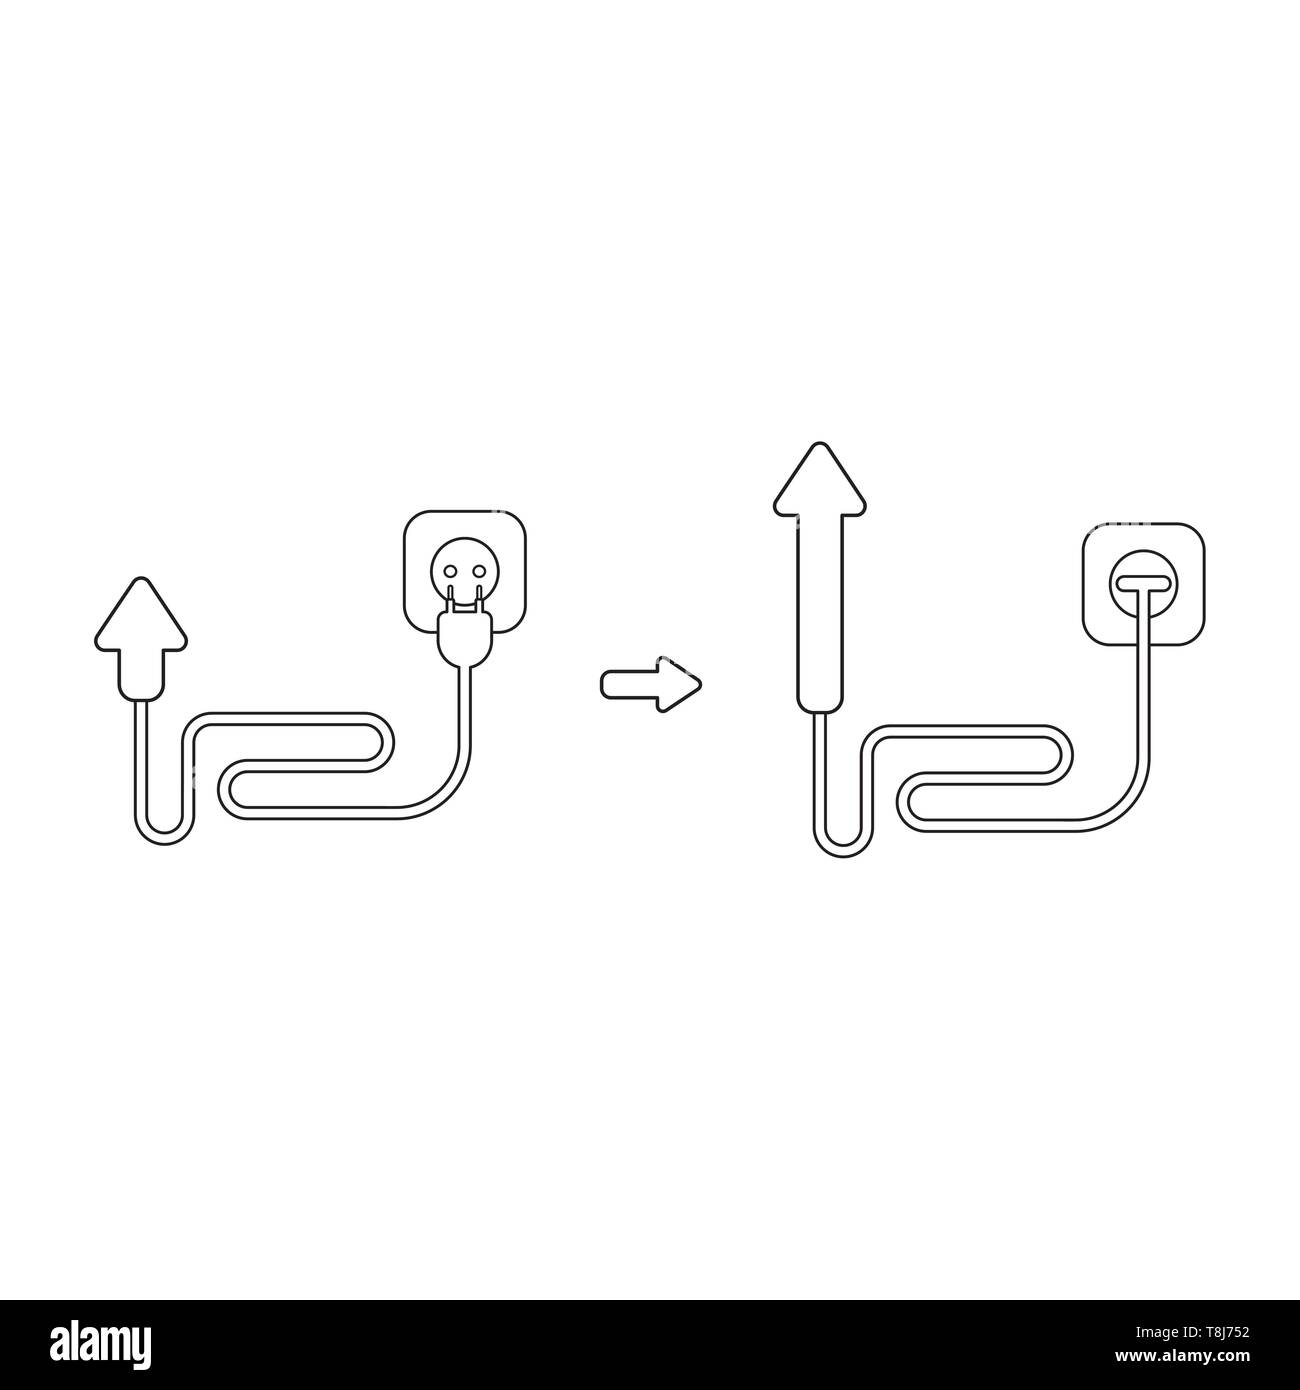 Vector icon concept of arrow with cable, plug and plugged into outlet and up. Black outlines. Stock Vector